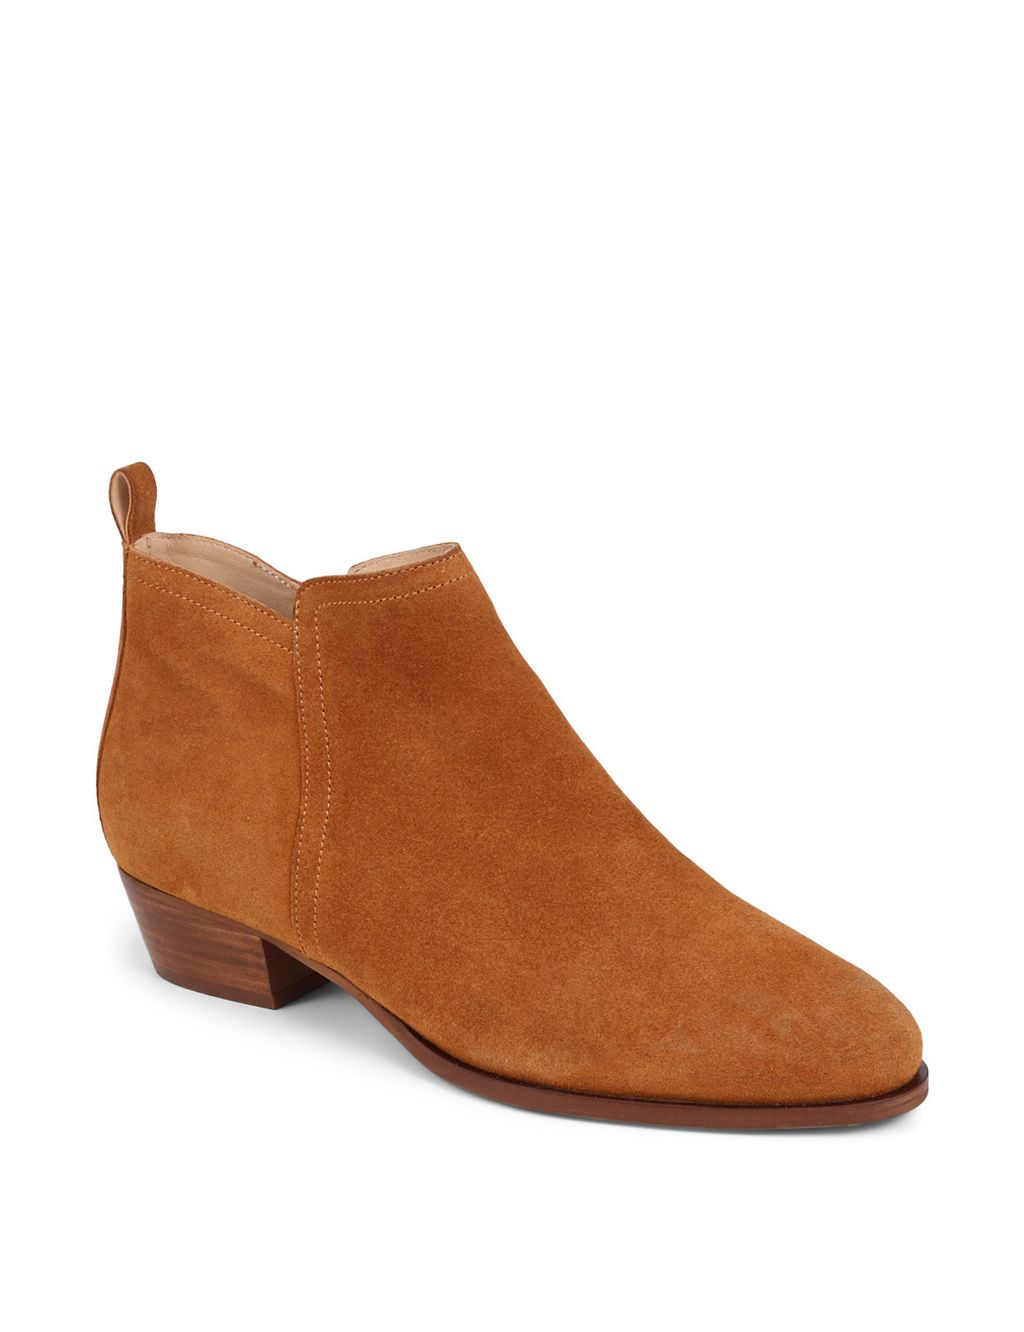 Suede Block Heel Round Toe Ankle Boots 6 of 7